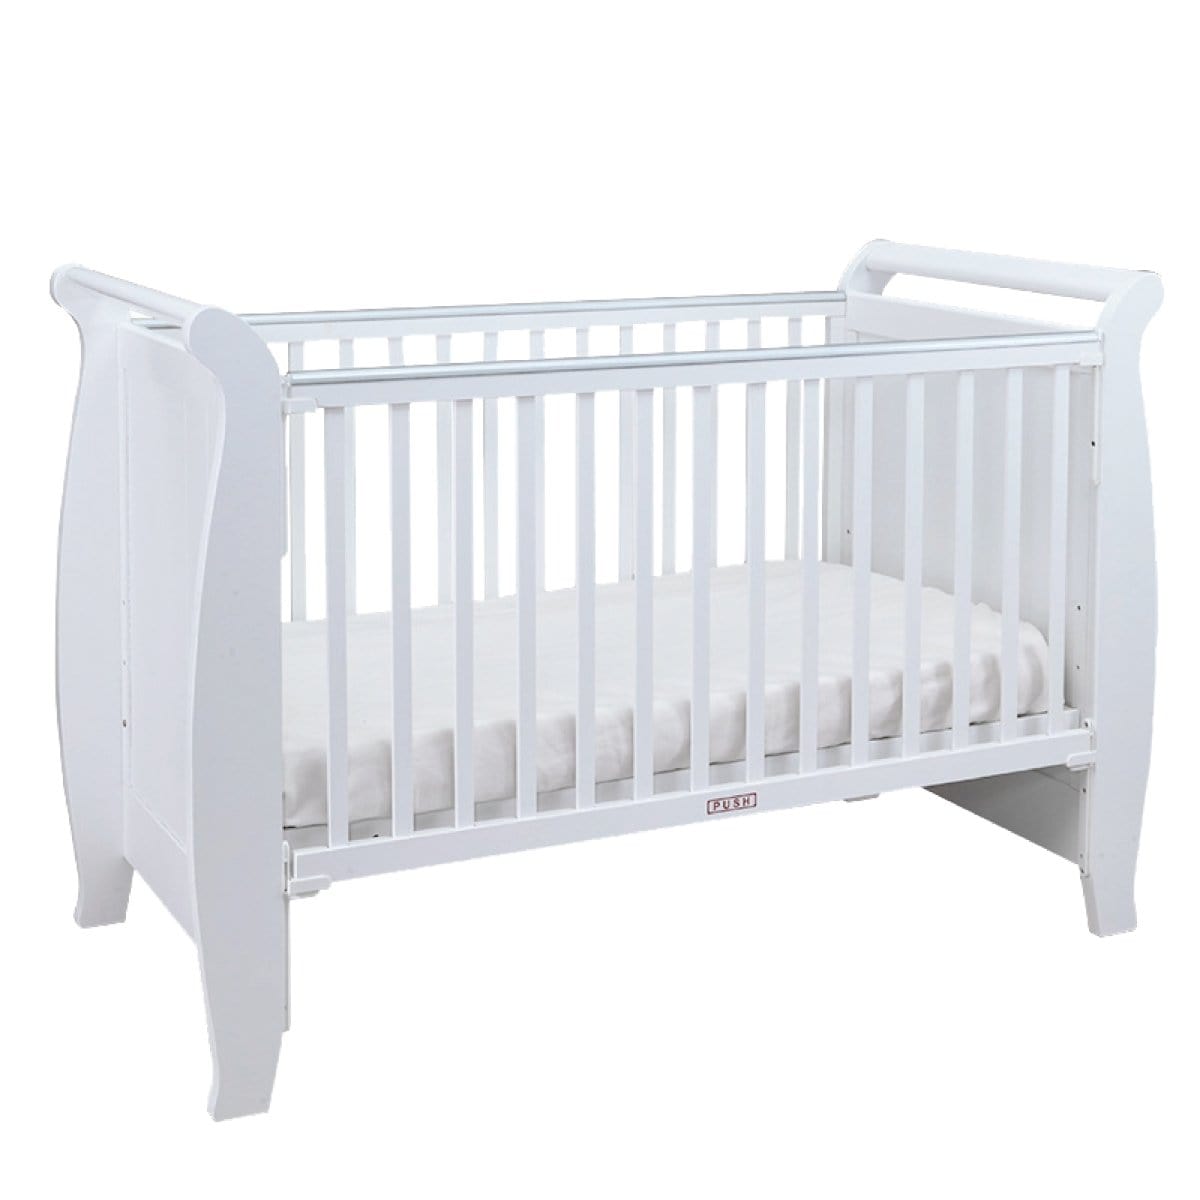 #1 Picket&Rail 3-in-1 Costa Solid Hardwood Convertible Baby Cot (76x154cm) Col: White picket and rail